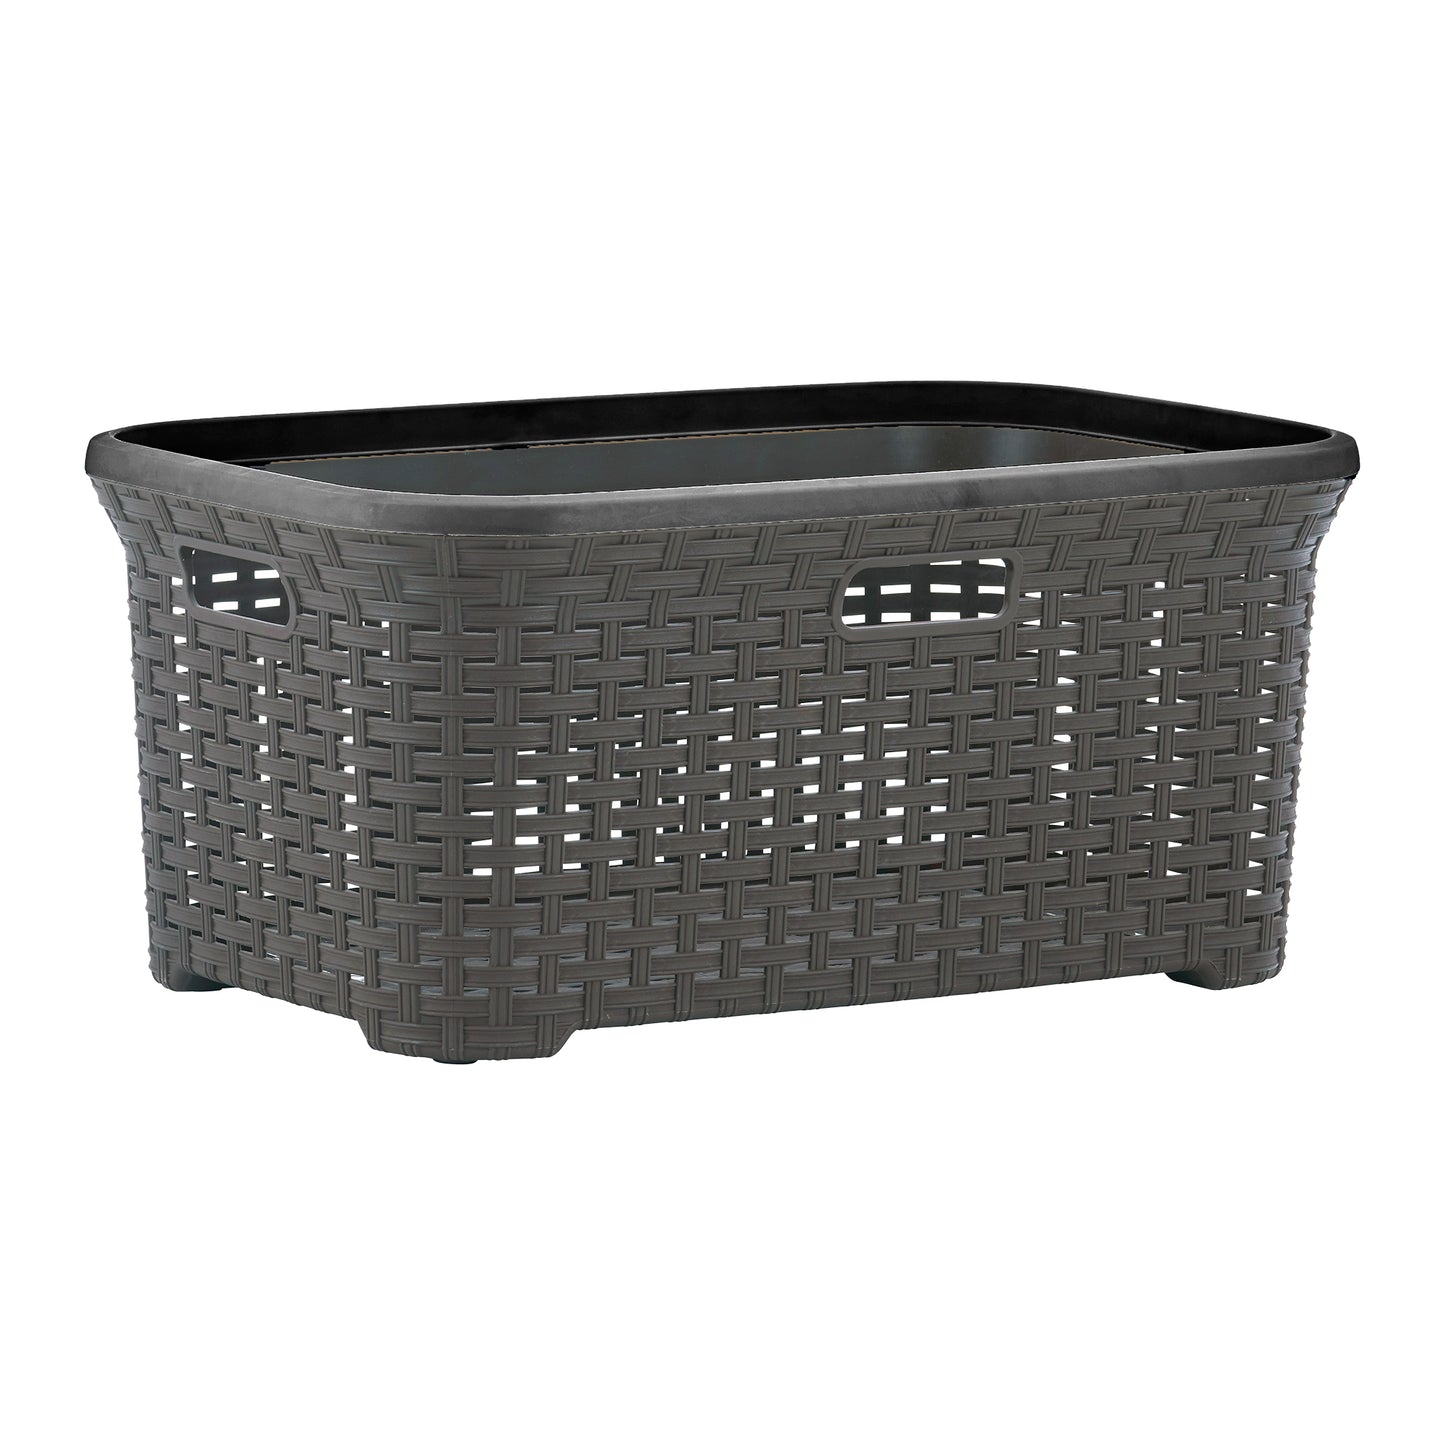 Wicker Style Laundry Basket with Cutout Handles, 50 Liter - Root Beer Brown